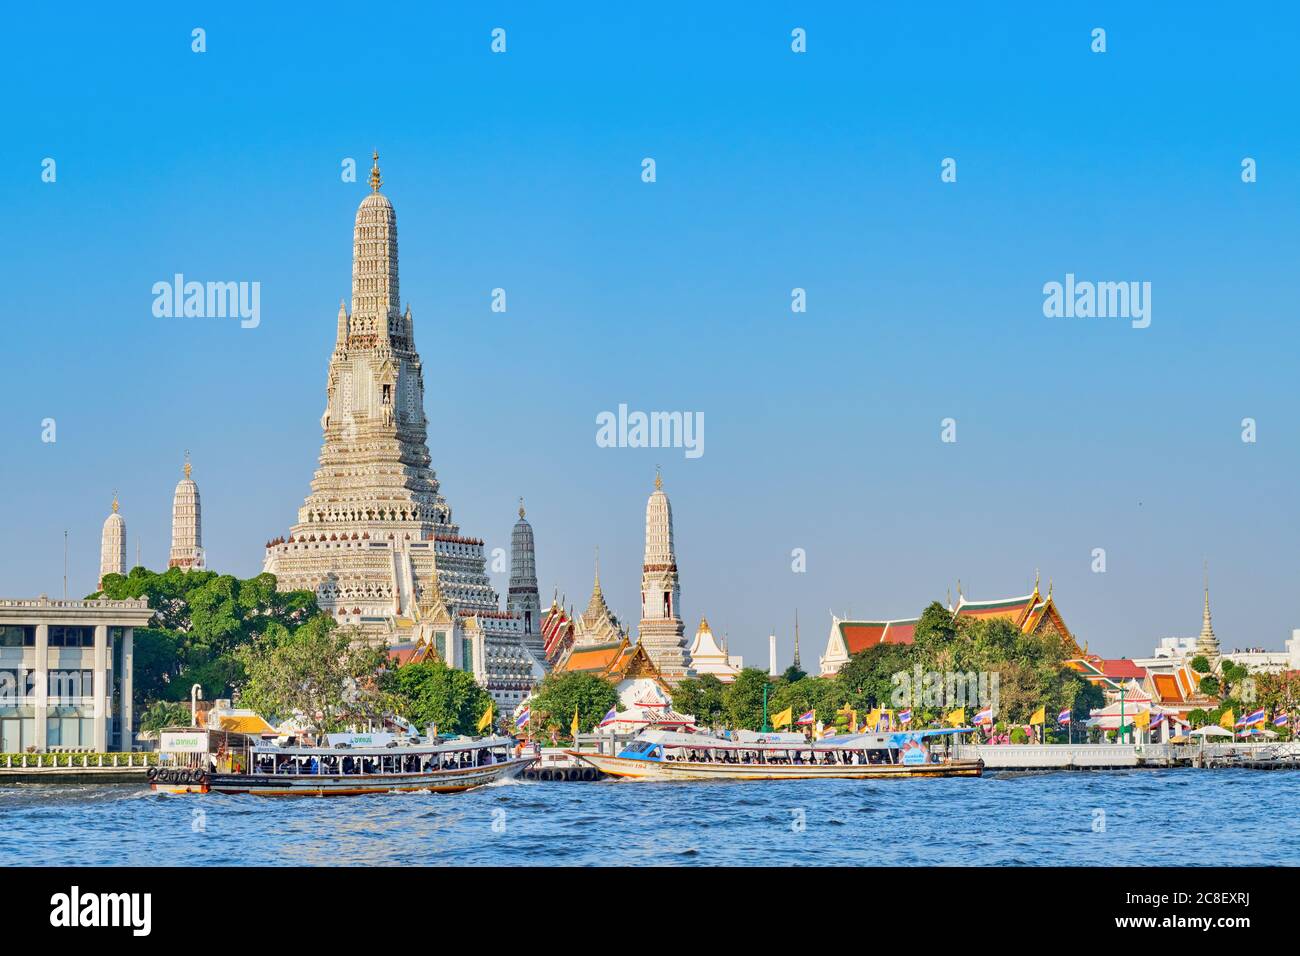 Towering Wat Po / Wat Pho (full name Wat Phra Chetuphon), an iconic temple in Bangkok, Thailand, seen from the opposite bank of the Chao Phraya River Stock Photo